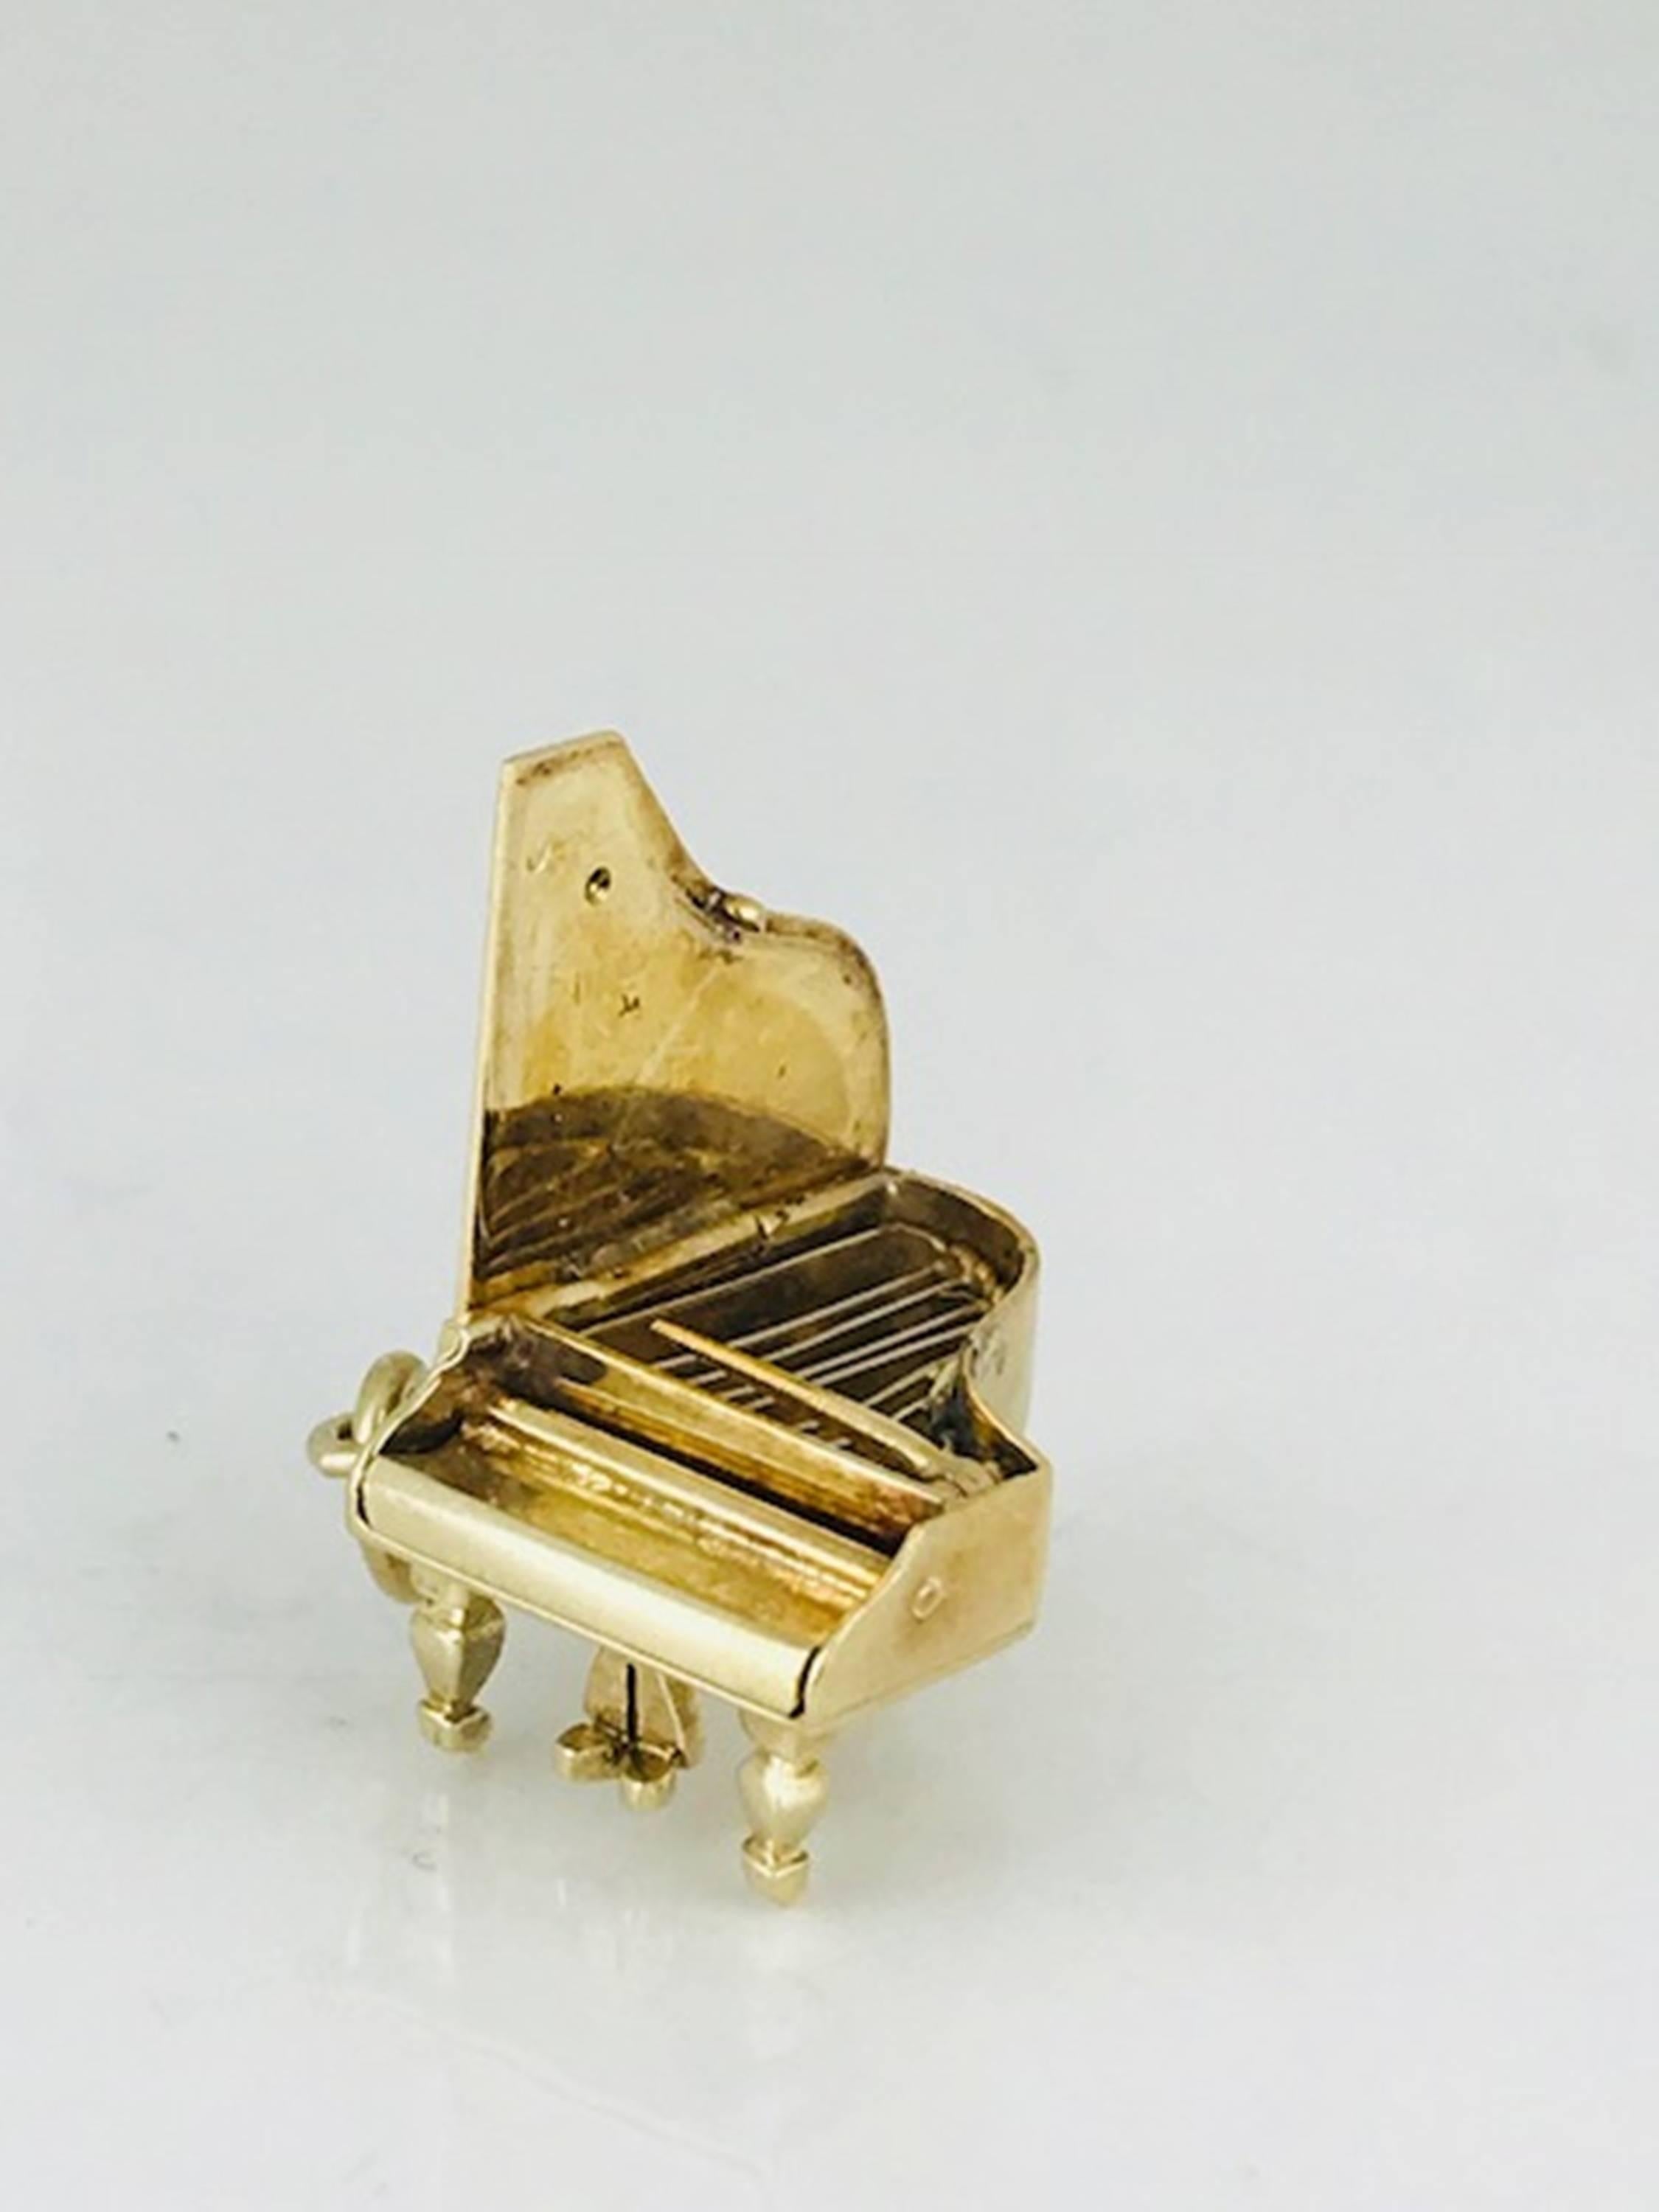 Grand Piano charm, With movable handmade parts made of 14 Karat Yellow & white gold, Circa 1930's
Vintage, unique and hard to find Piano can be used for charm bracelet or necklace

GIA Gemologist, inspected & evaluated